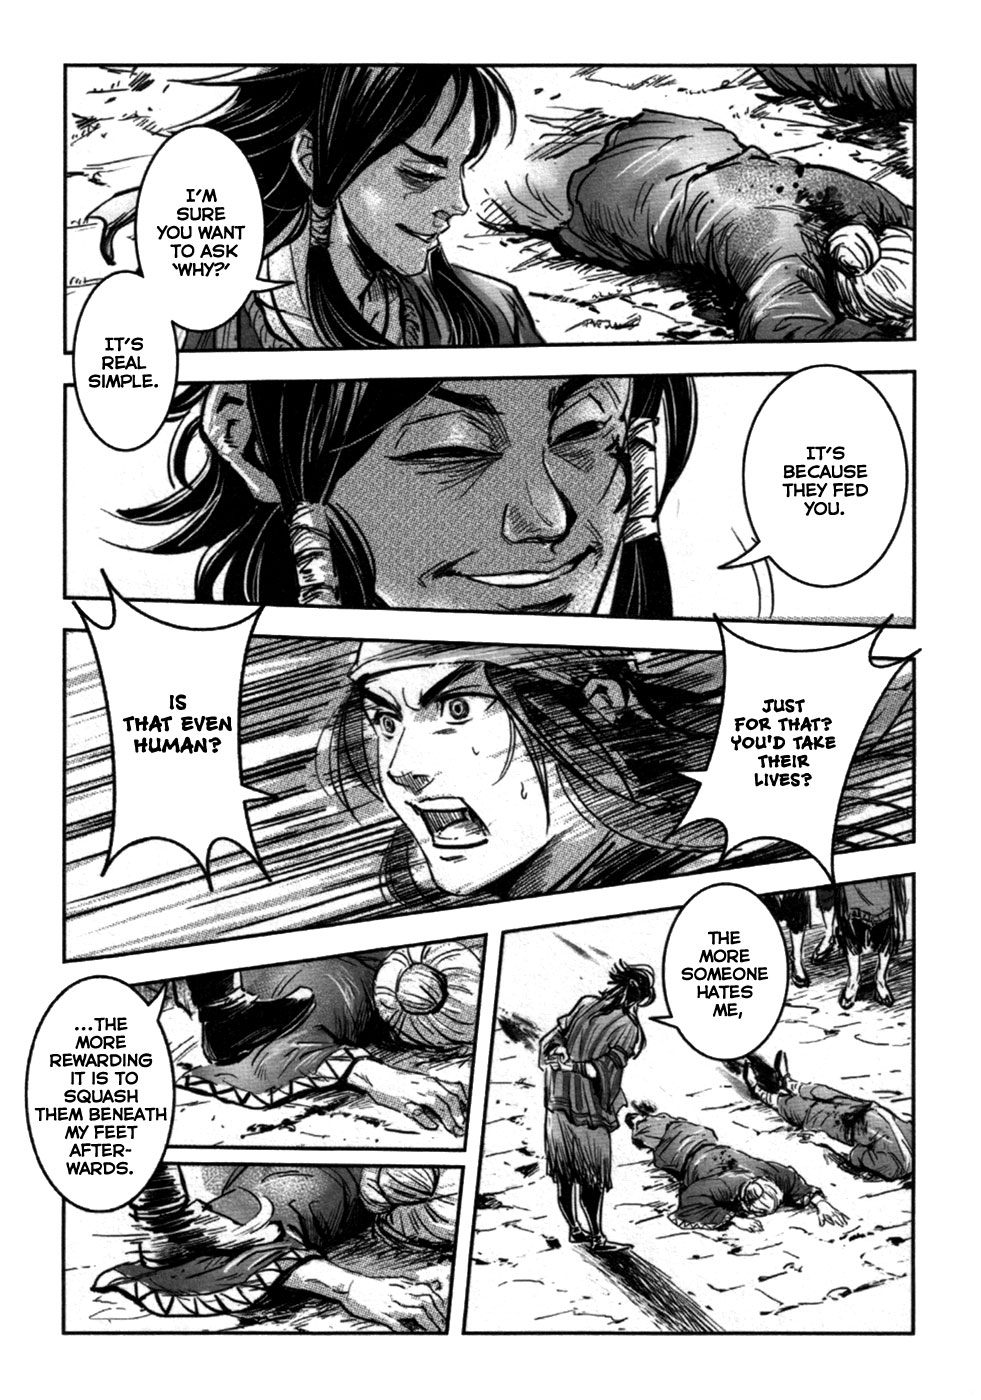 Blood and Steel Vol. 13 Ch. 70.1 Lu Ling Hui (Part 2) (1)